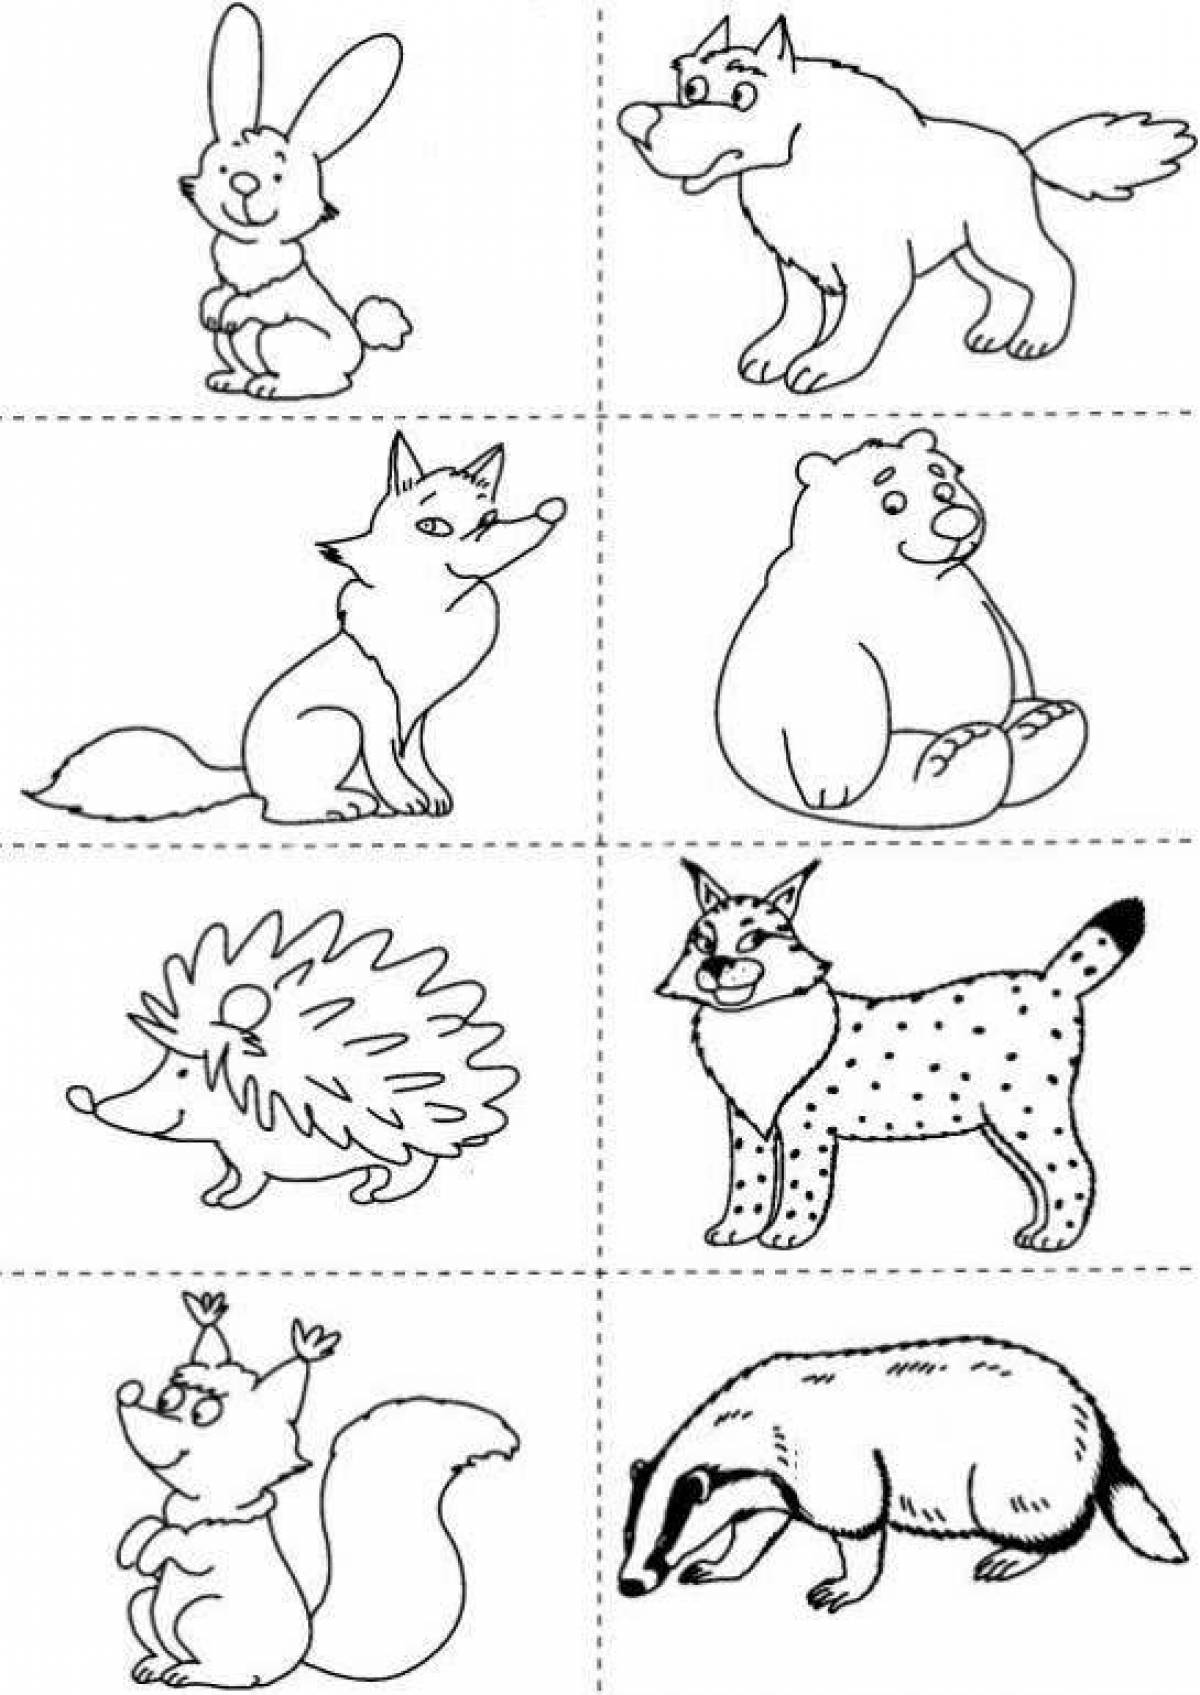 Outstanding wild animal coloring page for 4-5 year olds